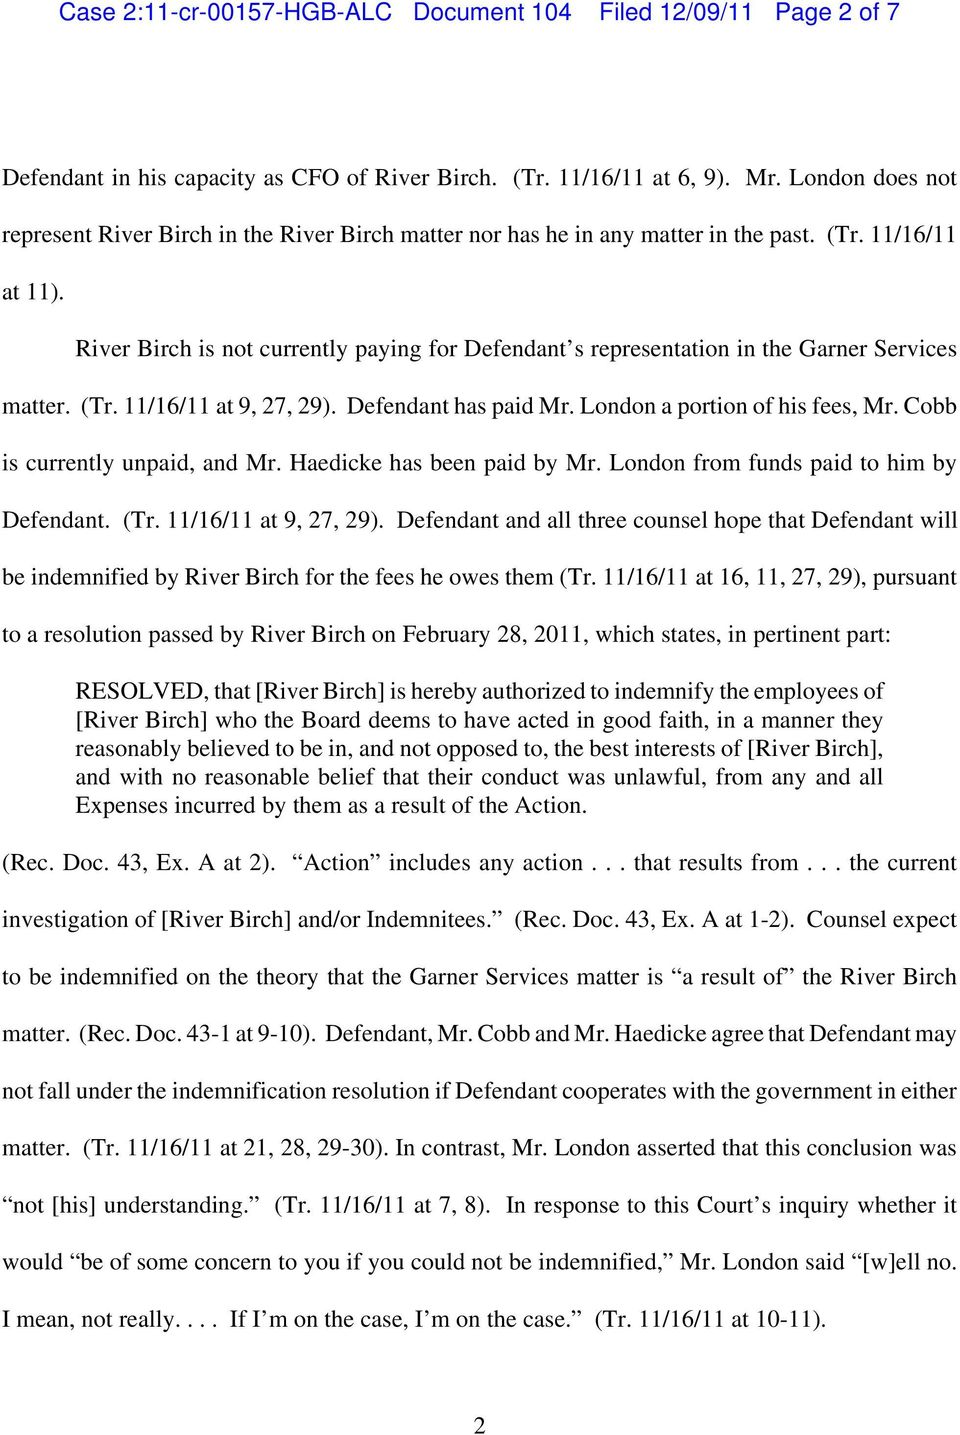 River Birch is not currently paying for Defendant s representation in the Garner Services matter. (Tr. 11/16/11 at 9, 27, 29). Defendant has paid Mr. London a portion of his fees, Mr.